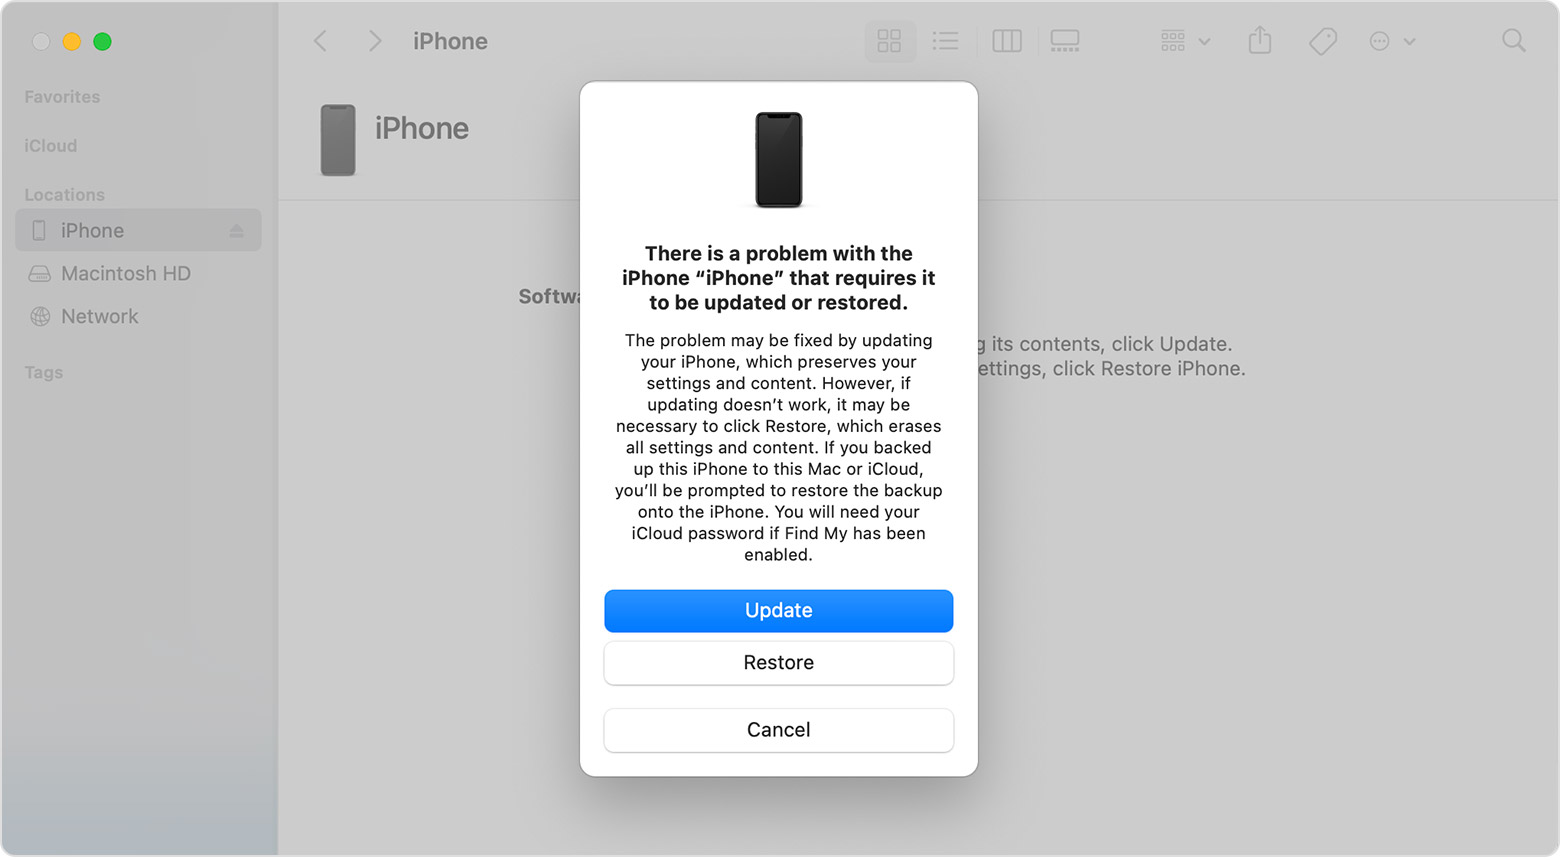 Read and confirm the warning message that appears, stating that your iPhone will be restored to its factory settings.
Click on the "Restore and Update" button to proceed.